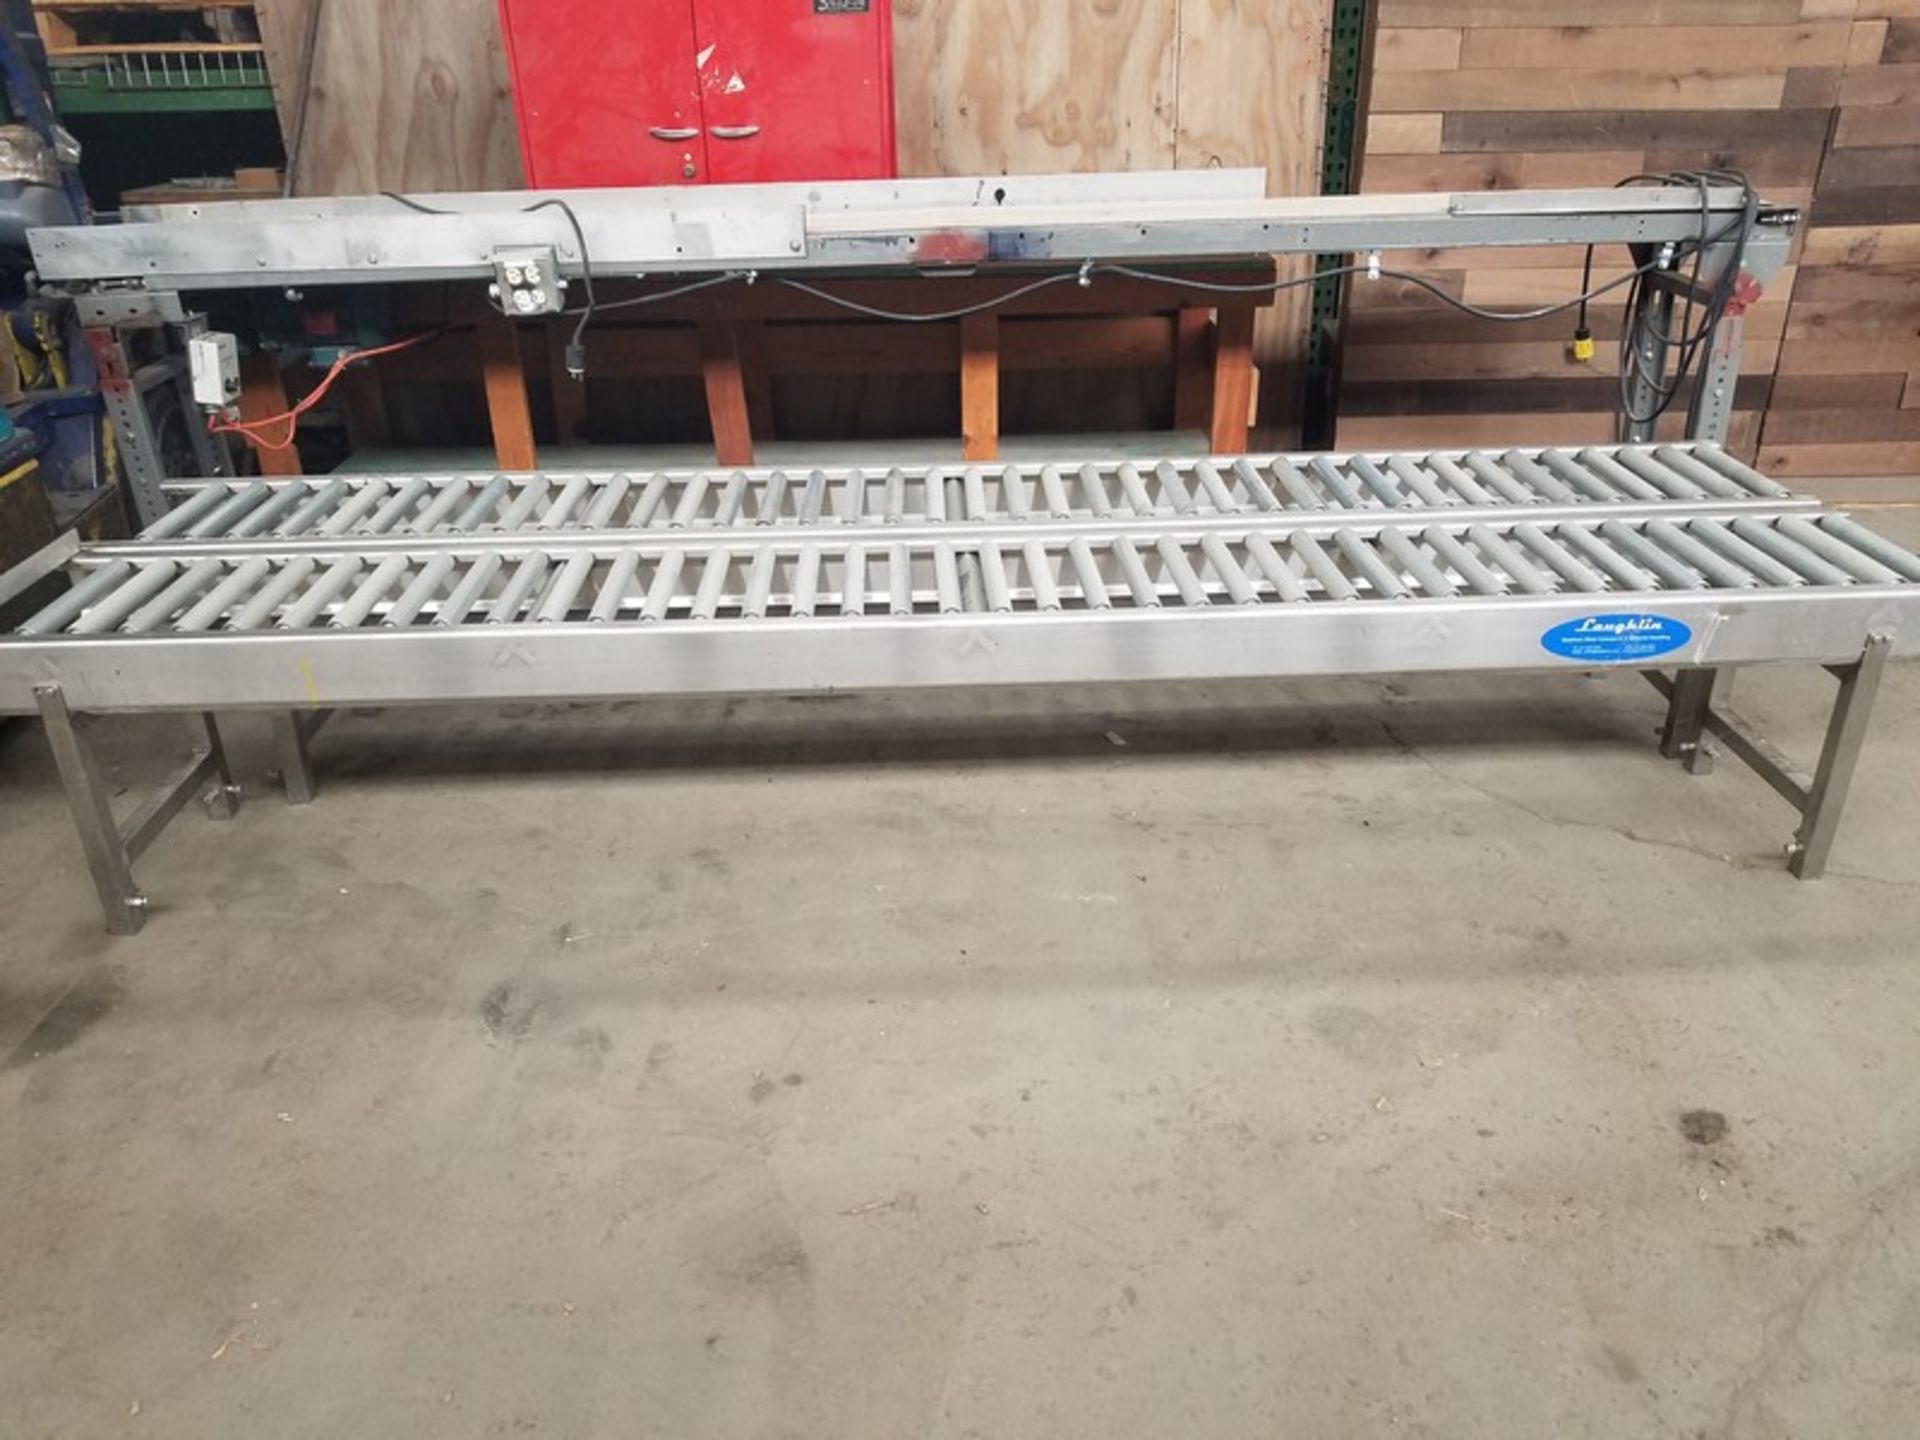 Two 13" wide x 120" long x 20" high Laughlin stainless steel gravity conveyor (Handling, Loading &